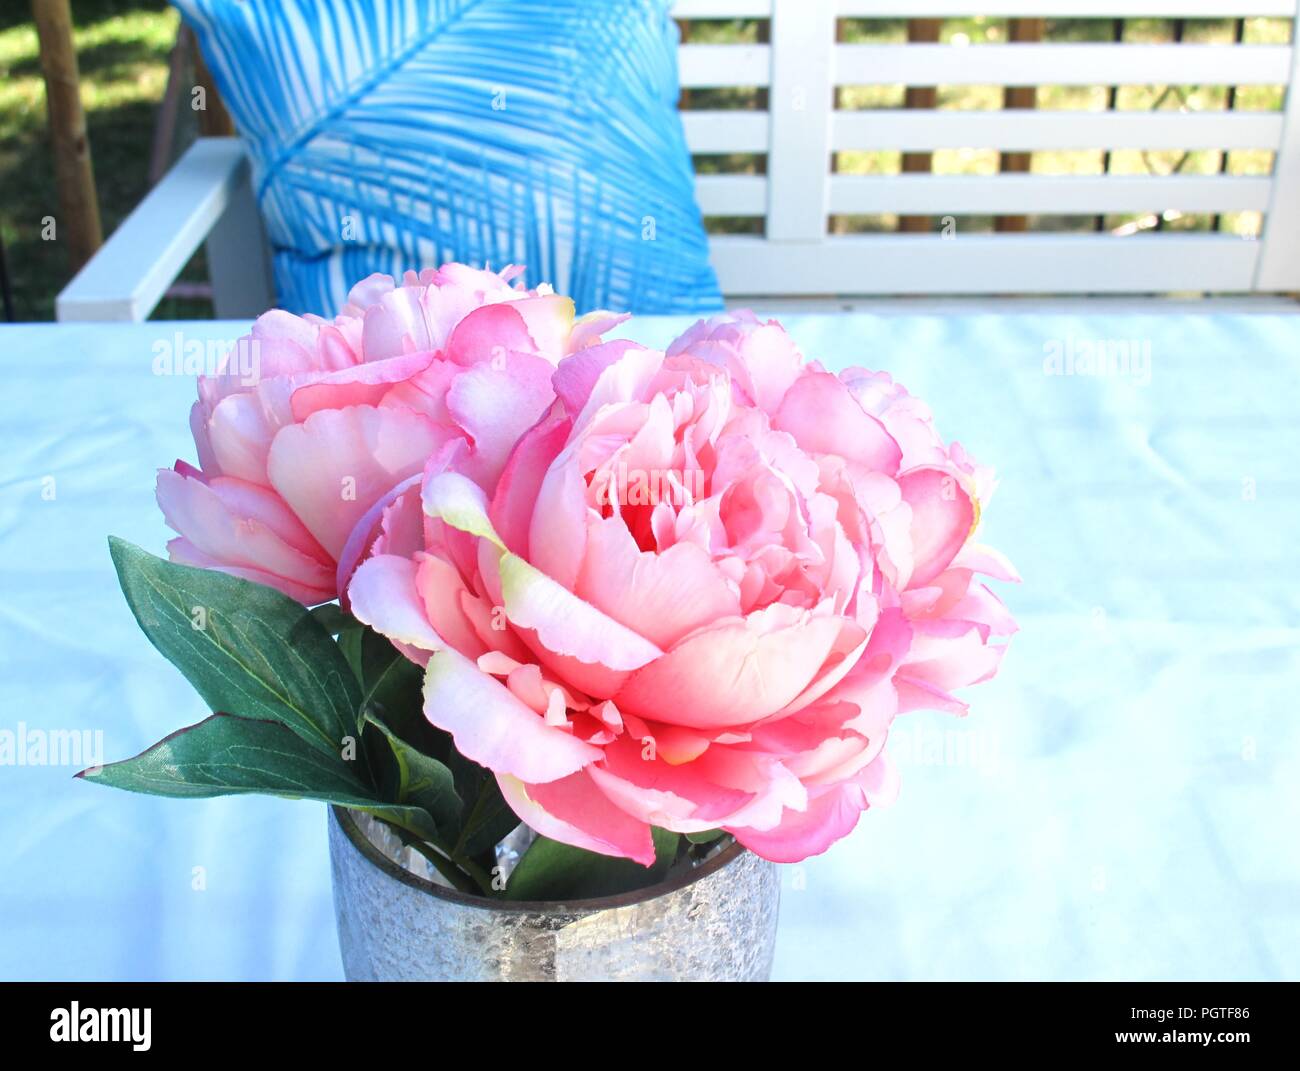 Pink and white peonies in a vase Stock Photo